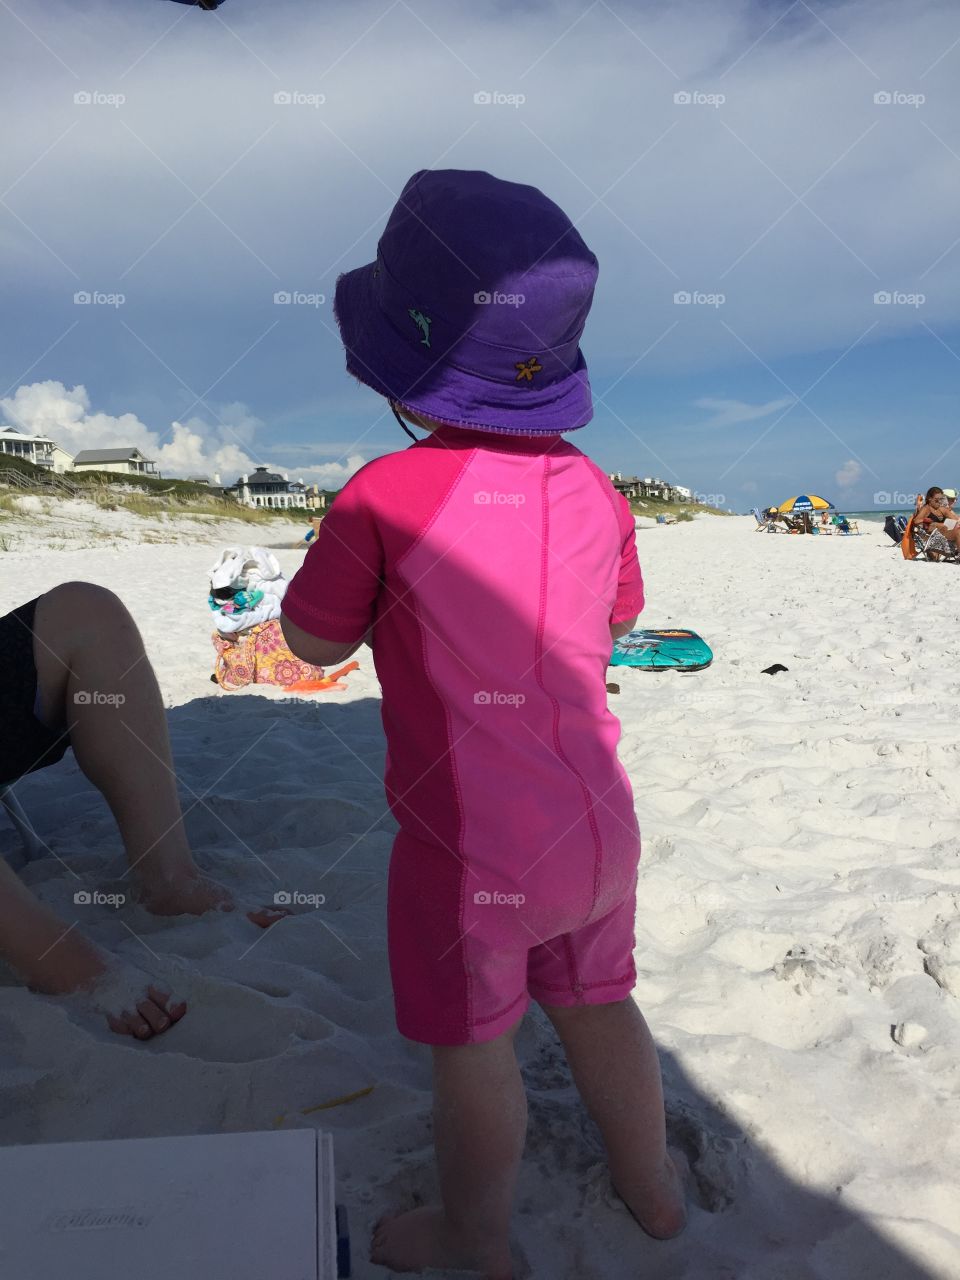 Baby at the beach